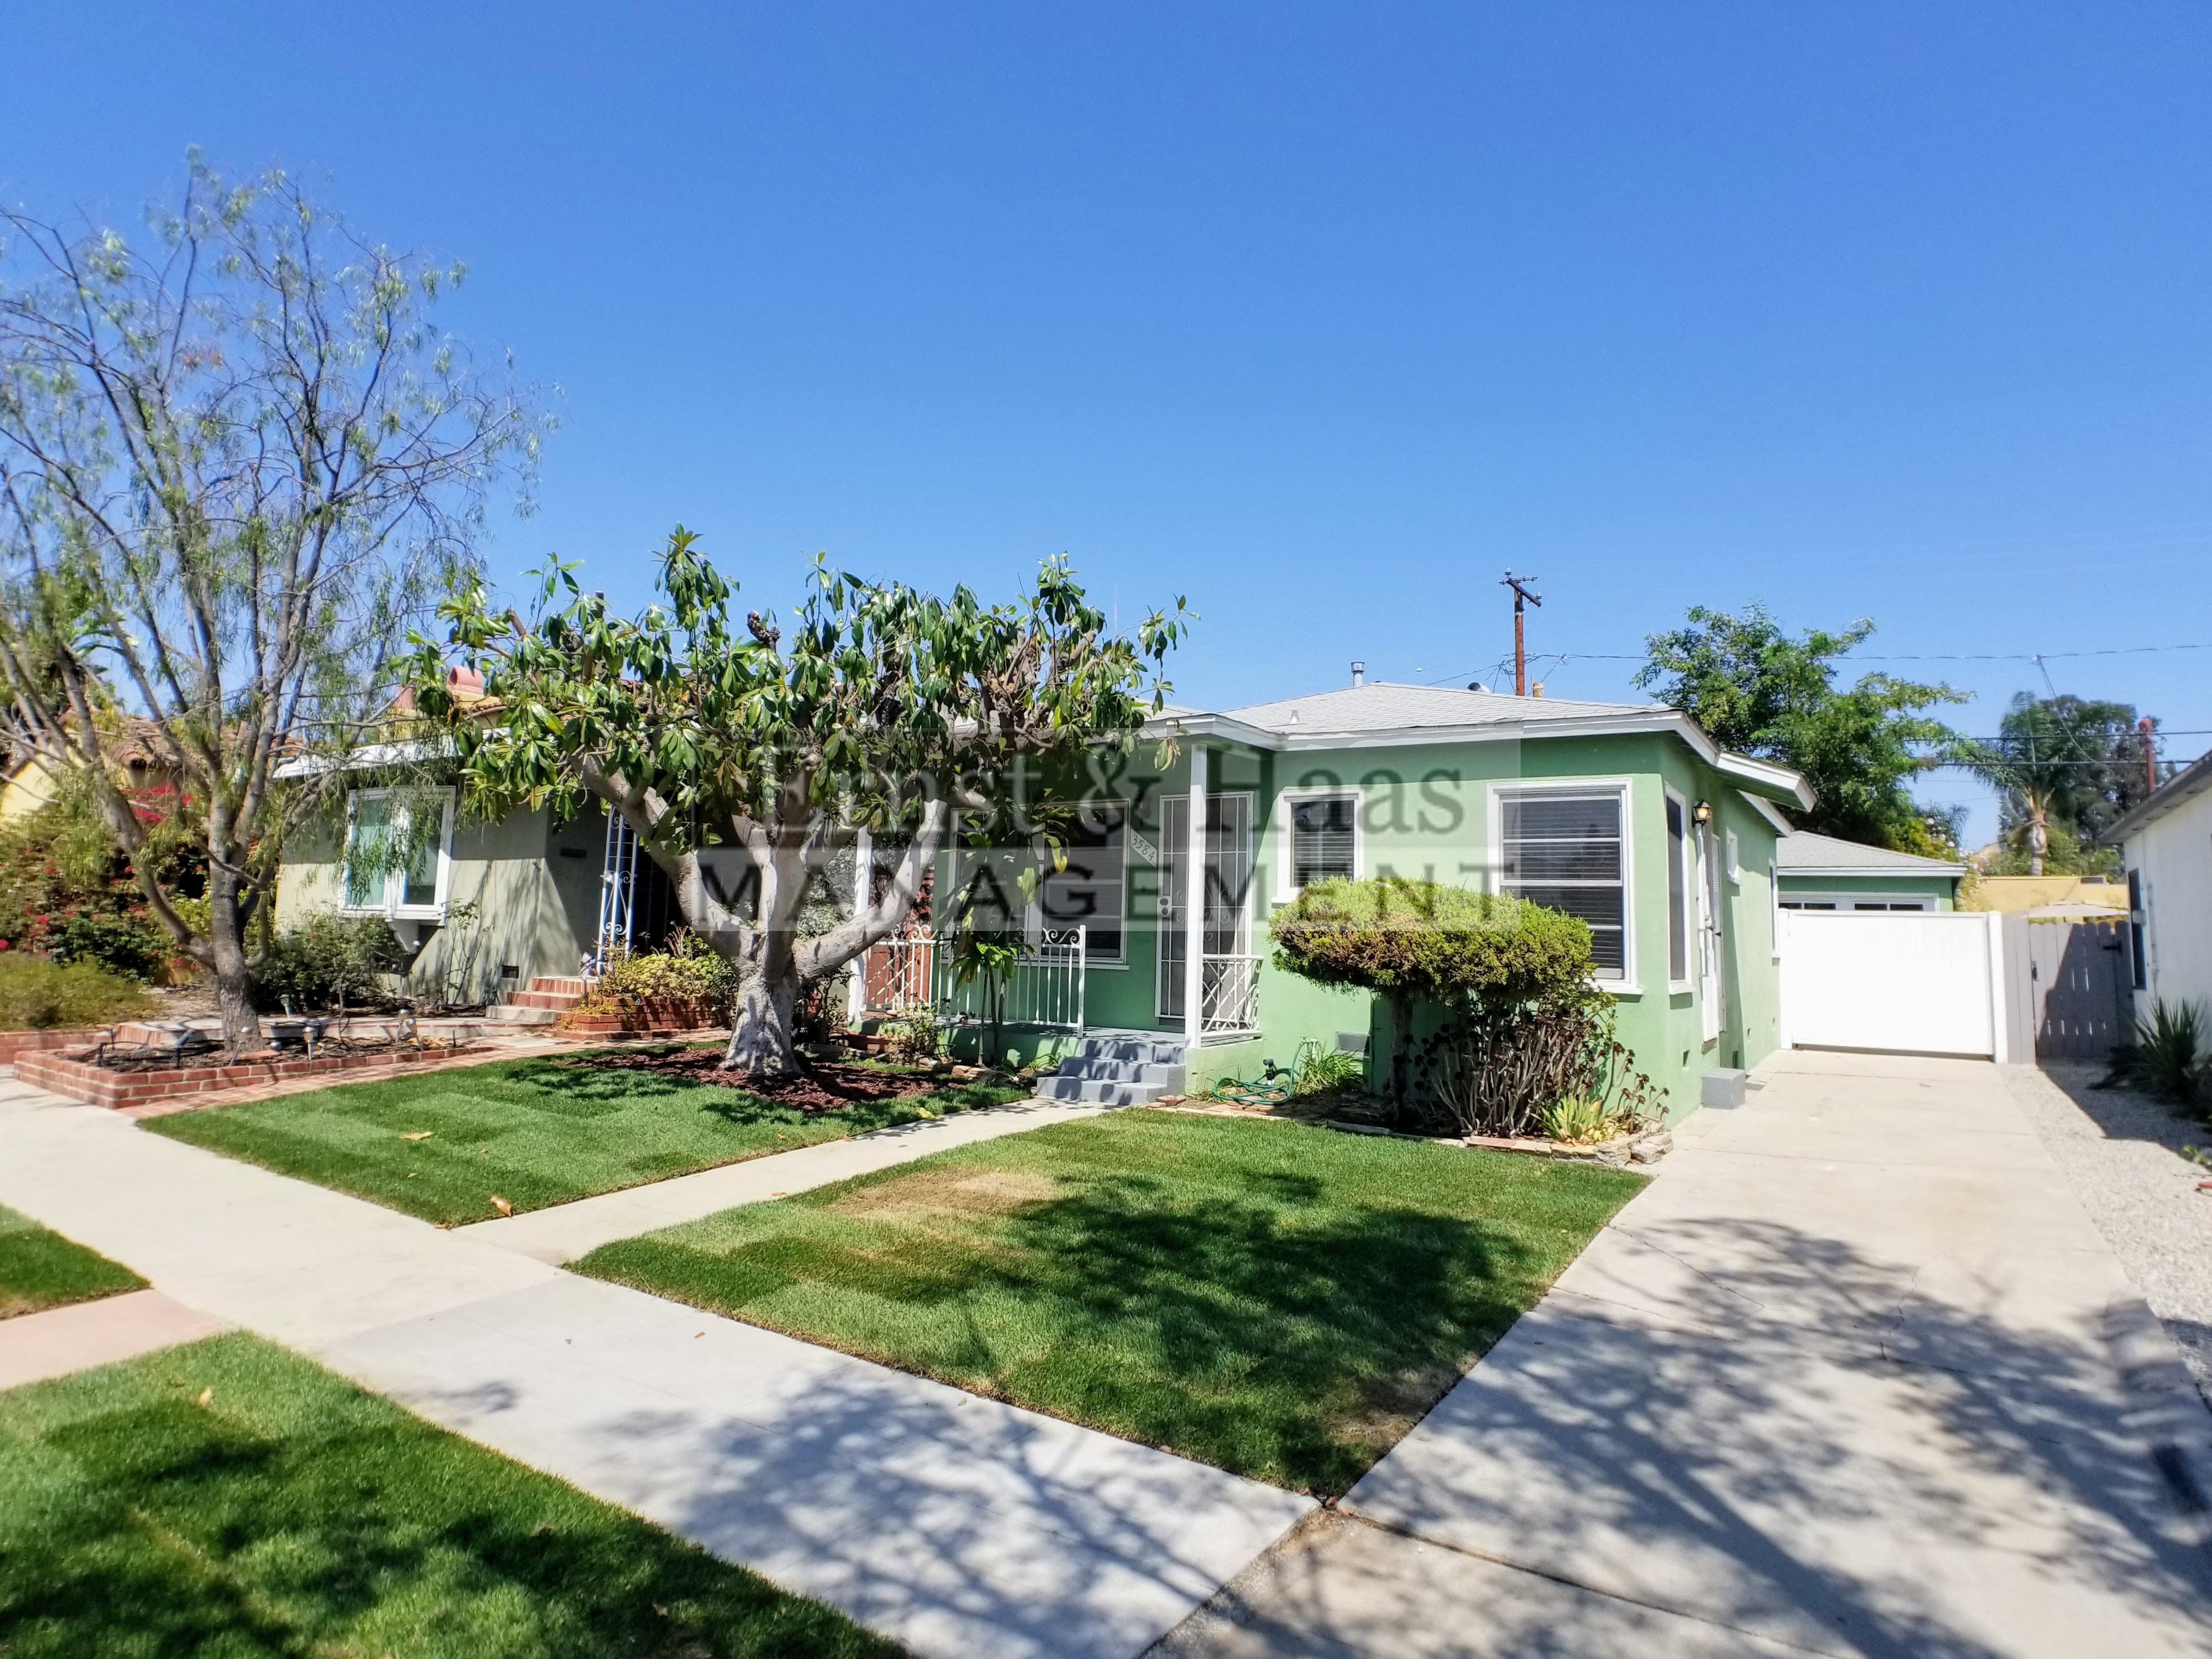 Property Listing For 08/13/2021